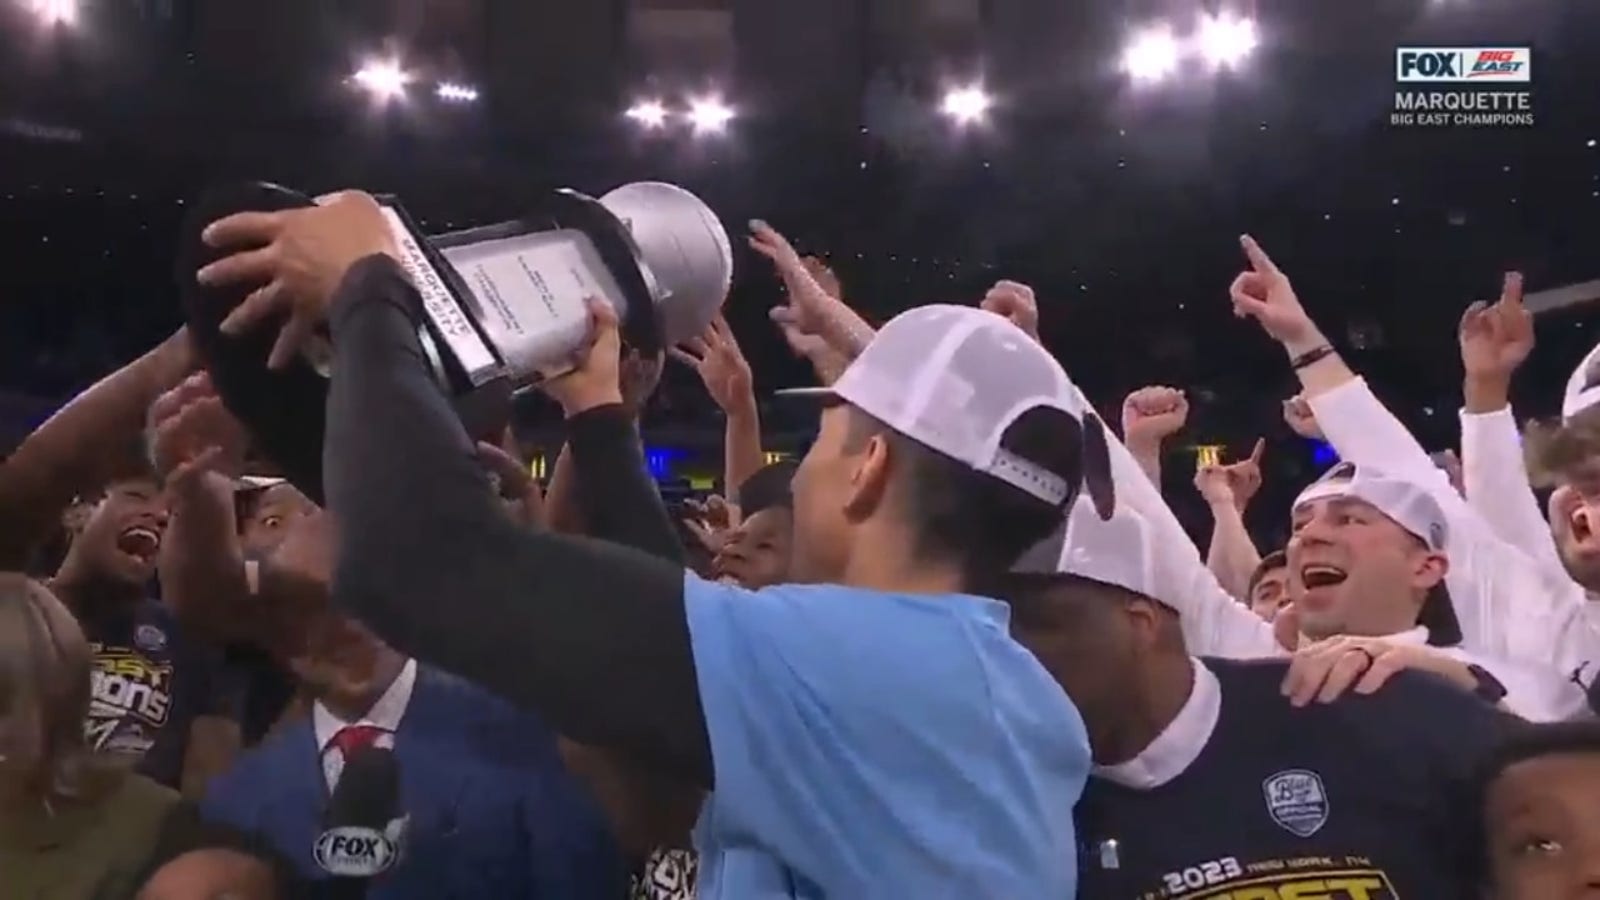 Marquette hoists the trophy